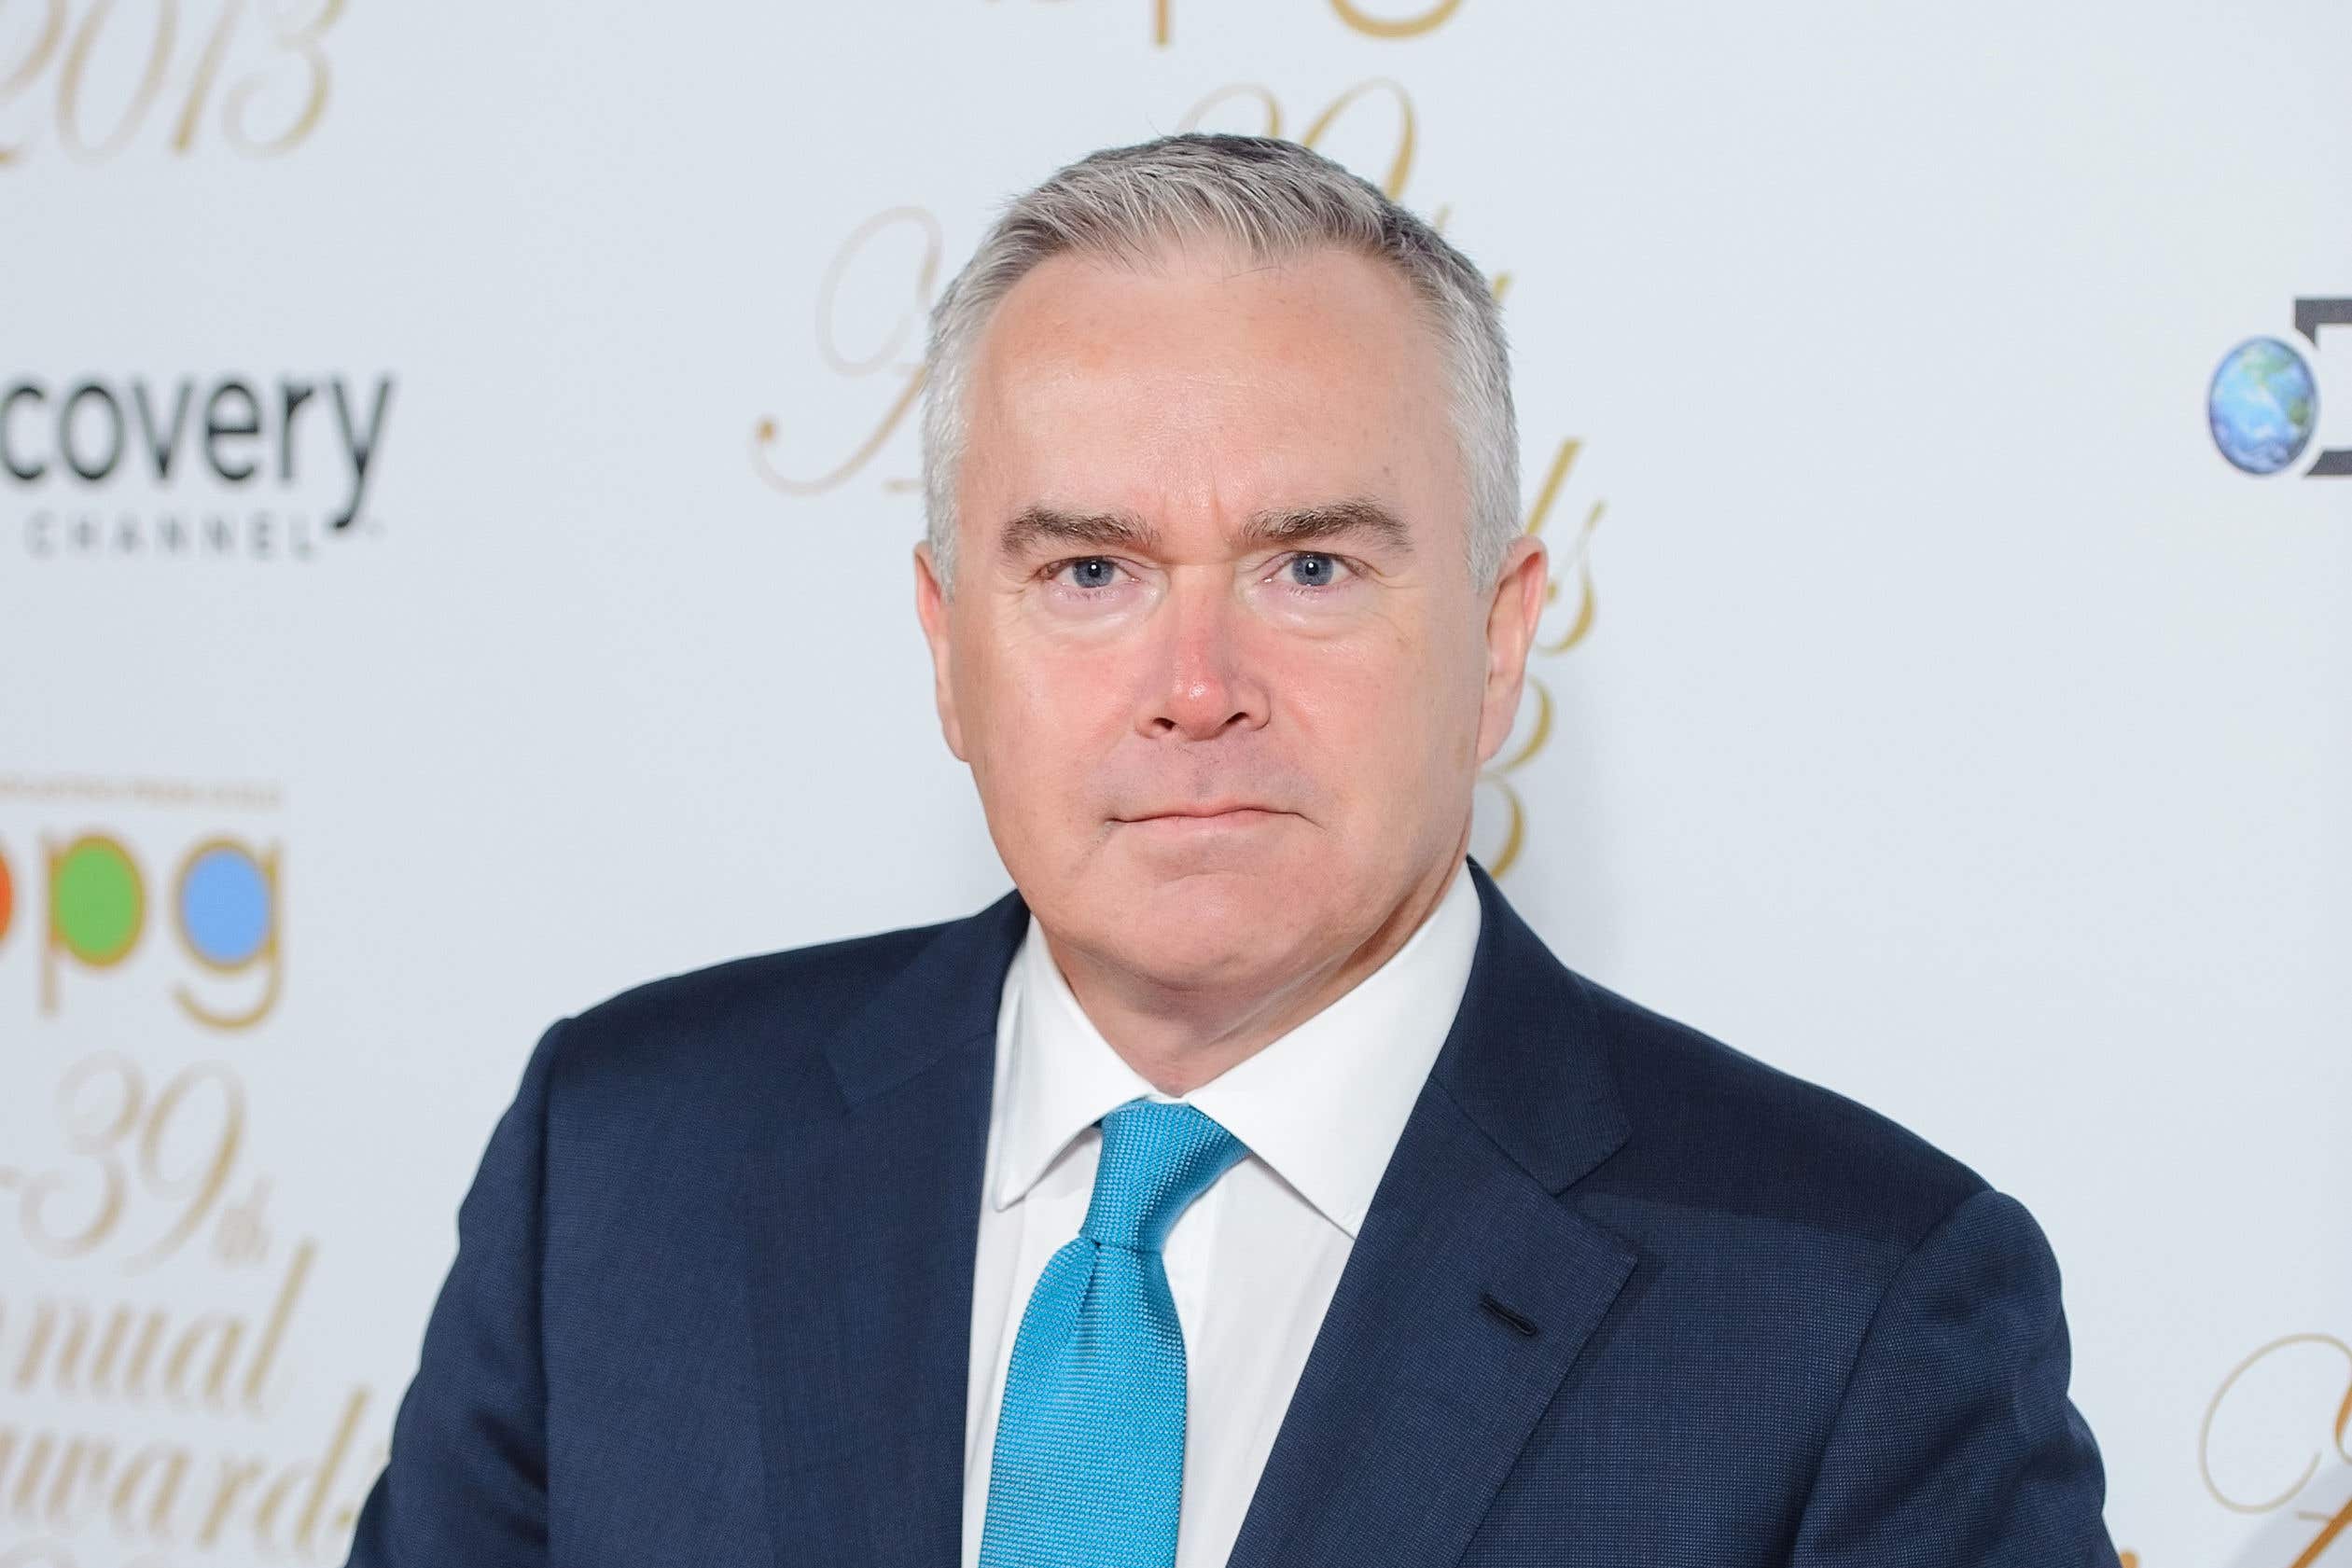 Huw Edwards has previously spoken about his mental health and bouts of depression that have left him ‘bedridden’ (Dominic Lipinski/PA)